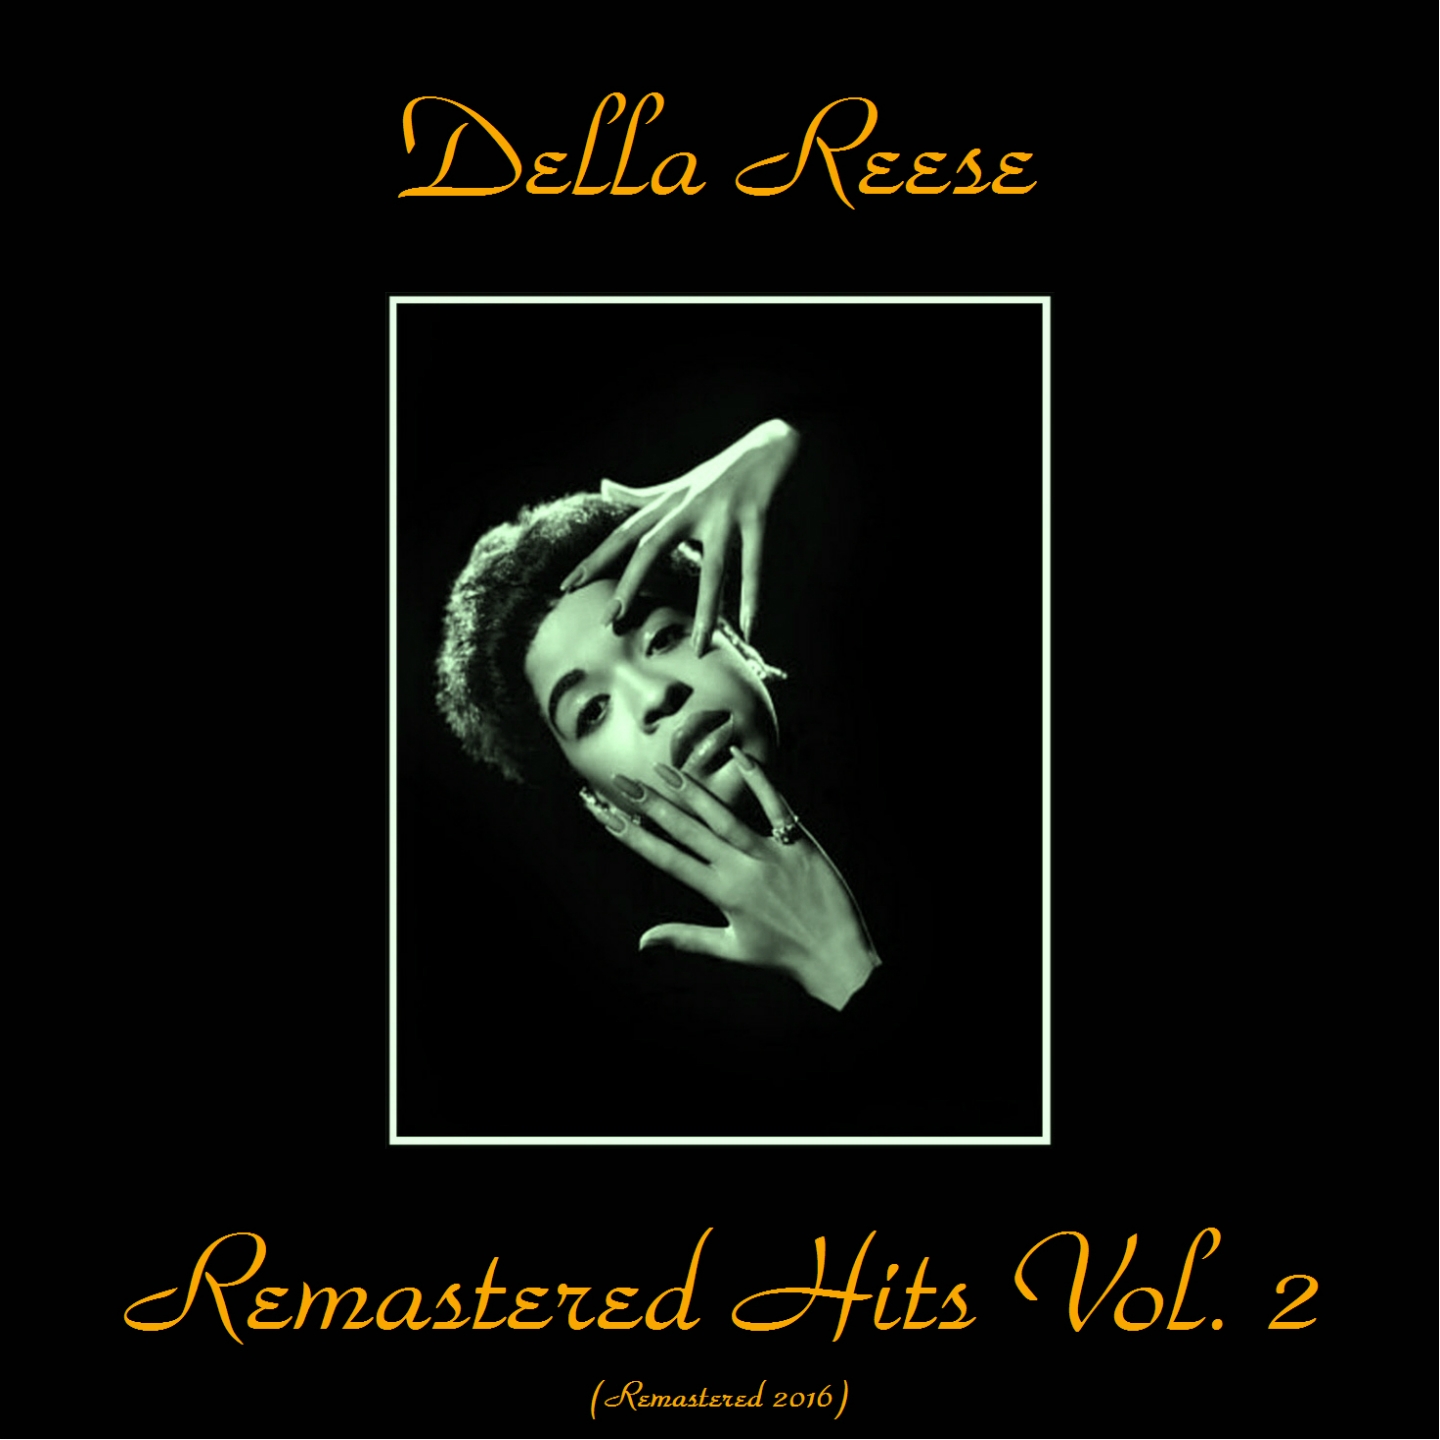 Remastered Hits Vol. 2 (All Tracks Remastered 2016)